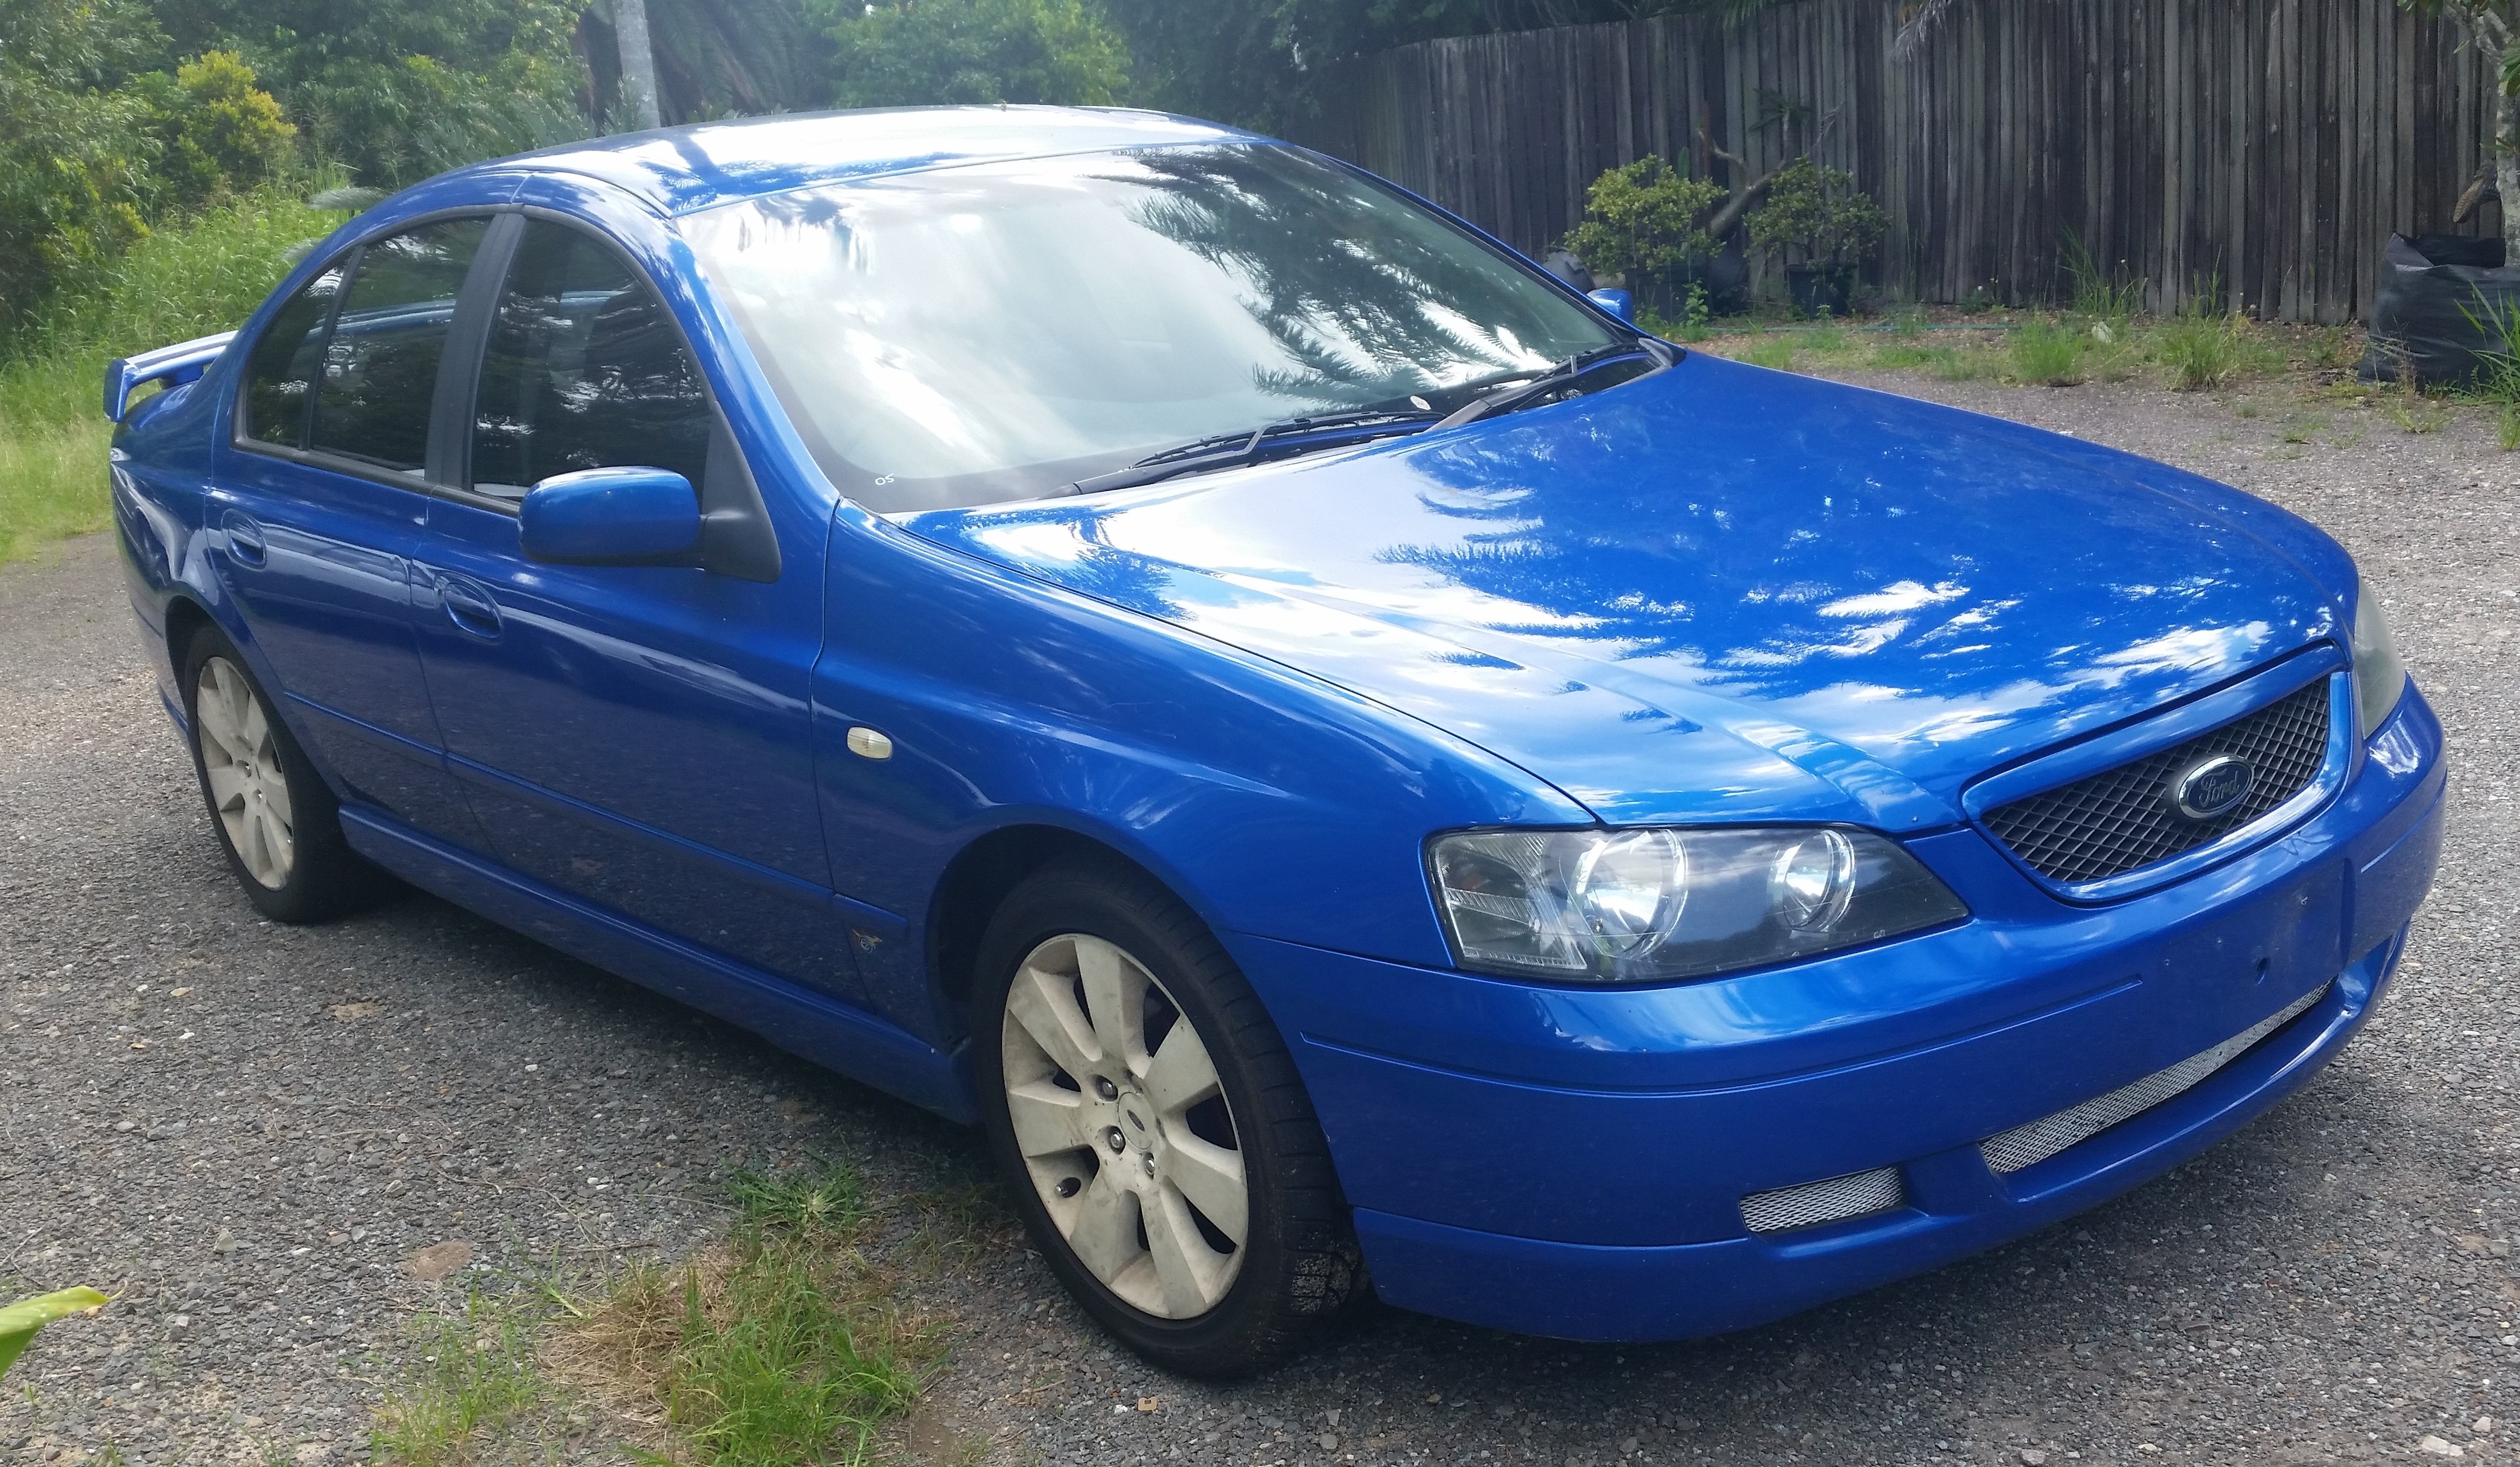 2005 Ford falcon ba mkii xt review #2